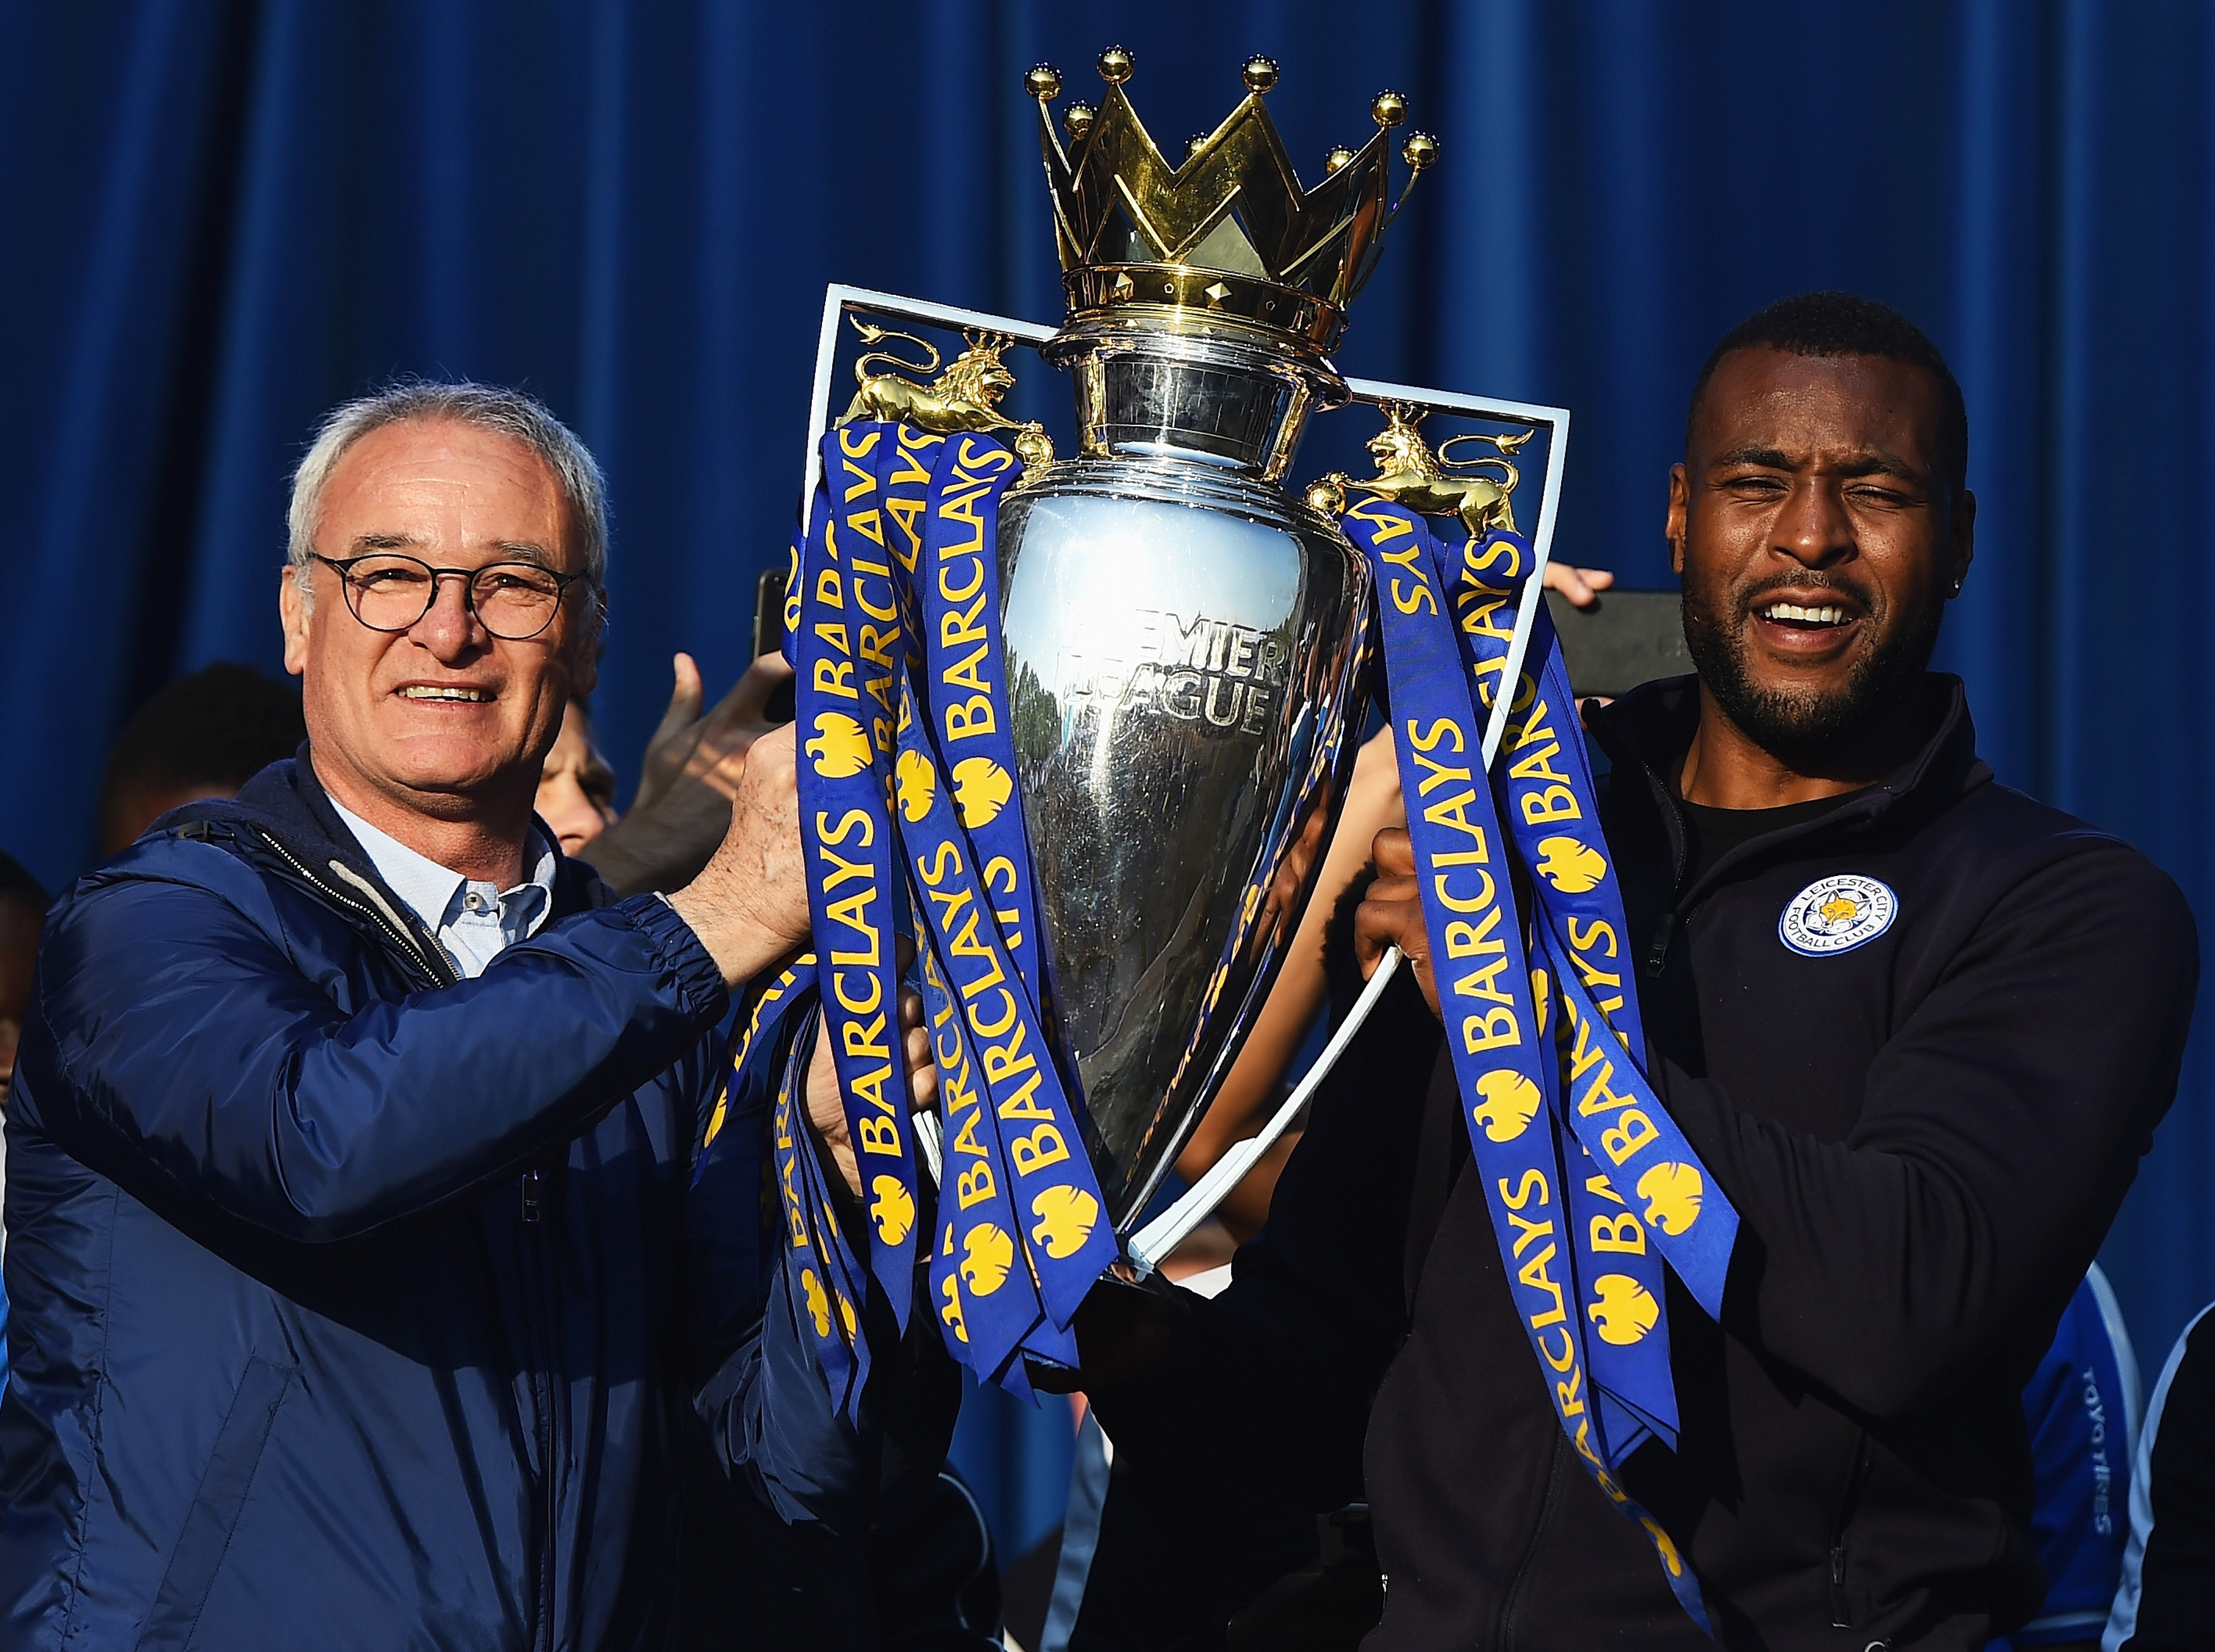 LEICESTER, ENGLAND - MAY 16: (L-R) Claudio Ranieri Manager of Leicester City and captain Wes Morgan of Leicester City show the trophy to the fans during the Leicester City Barclays Premier League winners bus parade on May 16, 2016 in Leicester, England. (Photo by Laurence Griffiths/Getty Images)